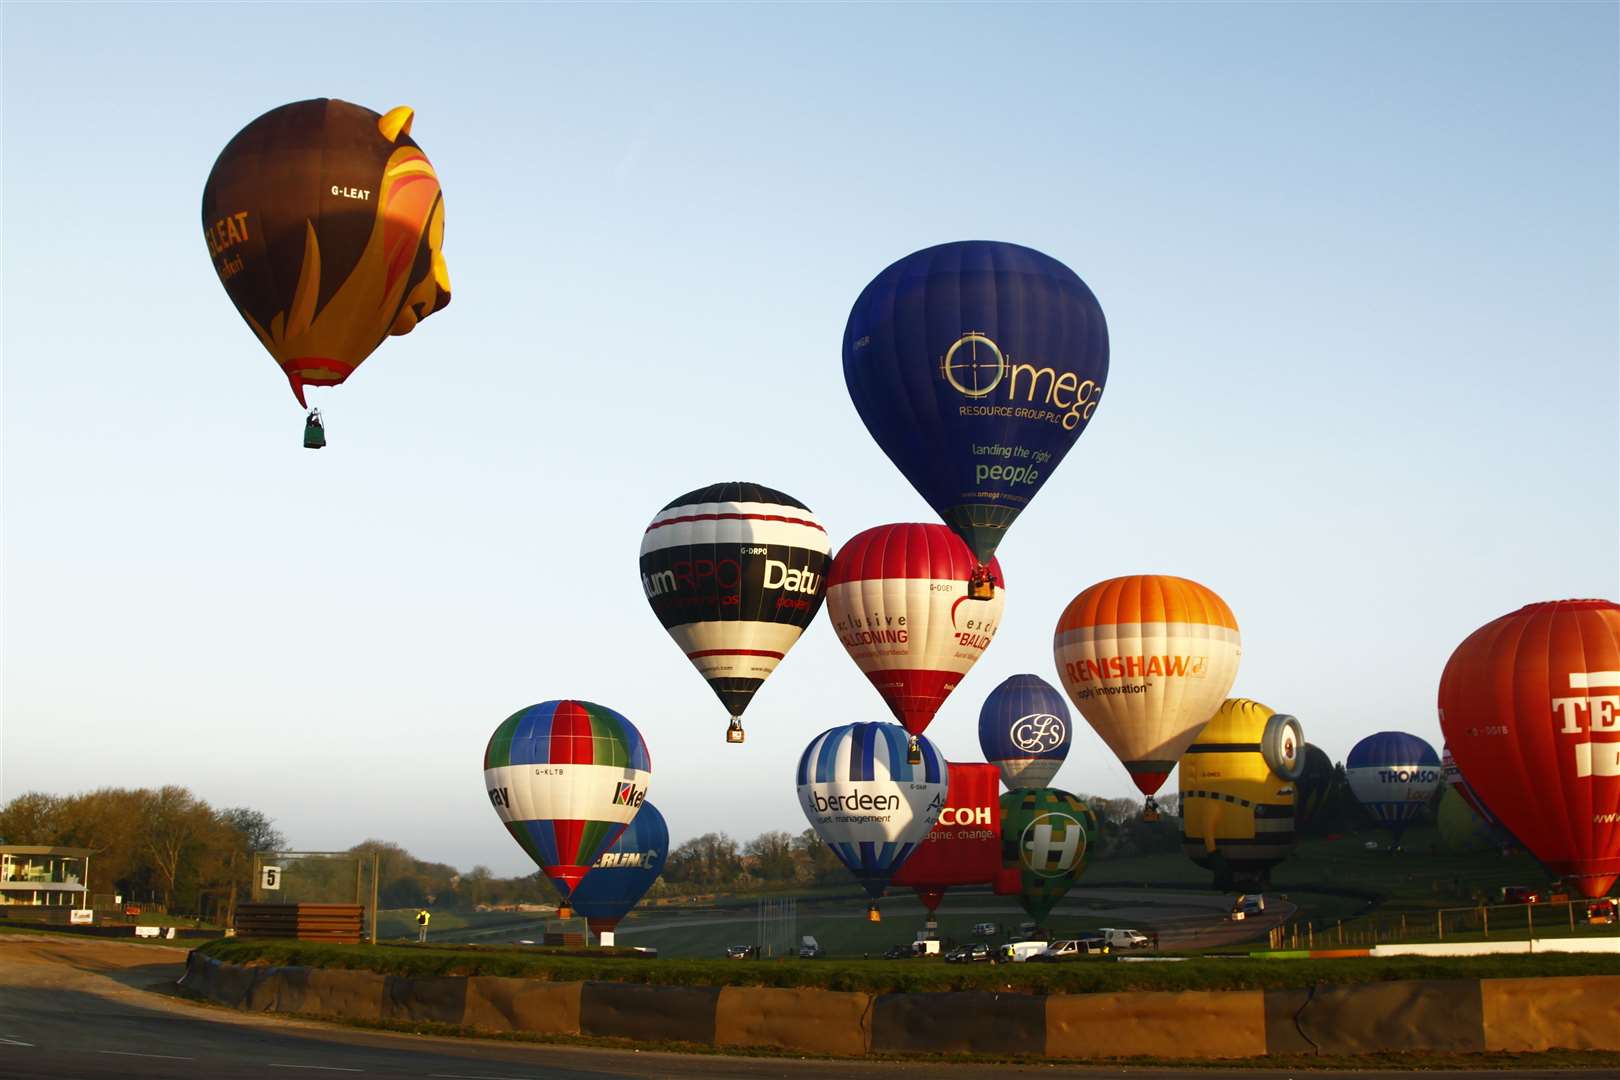 82 hot air balloons took off from Lydden Hill and crossed the Channel in April 2017, setting a new Guinness World Record